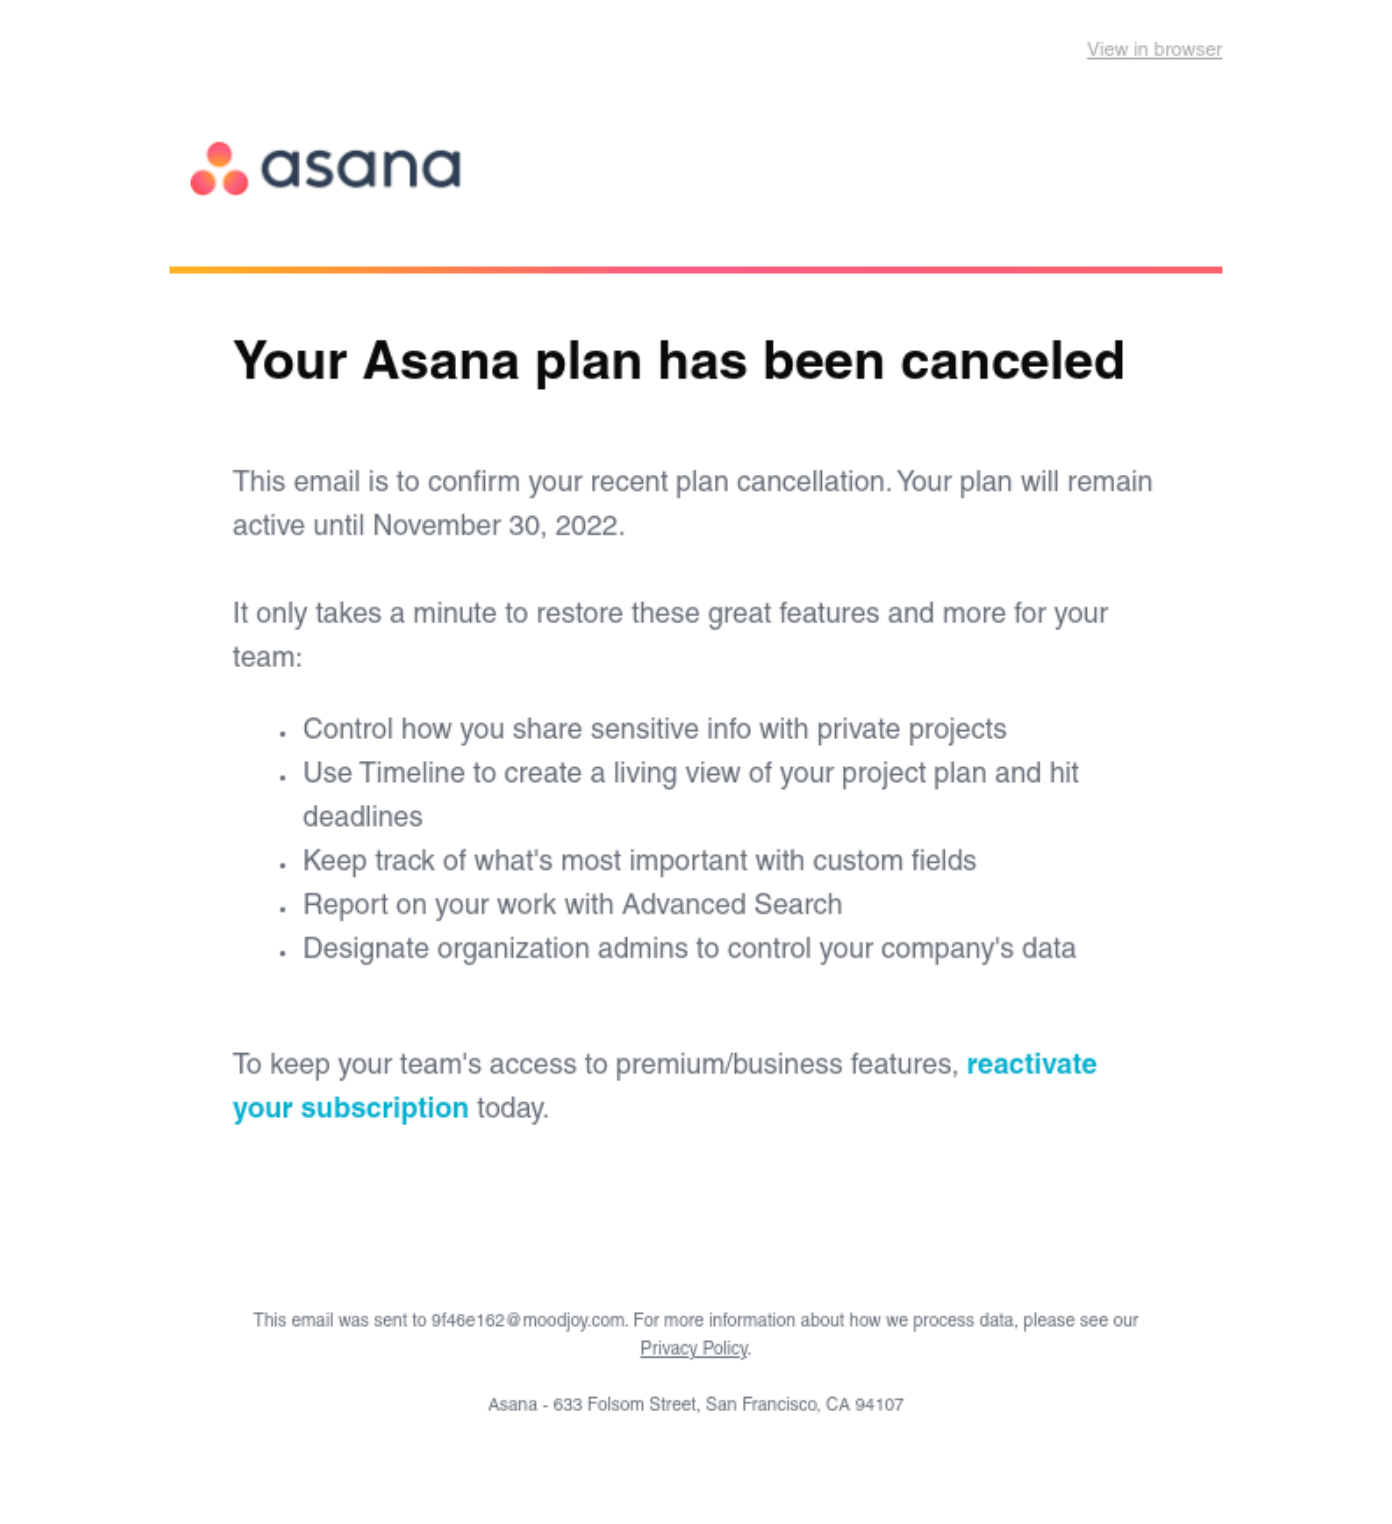 SaaS Cancellation Emails: Screenshot of Asana's cancellation email